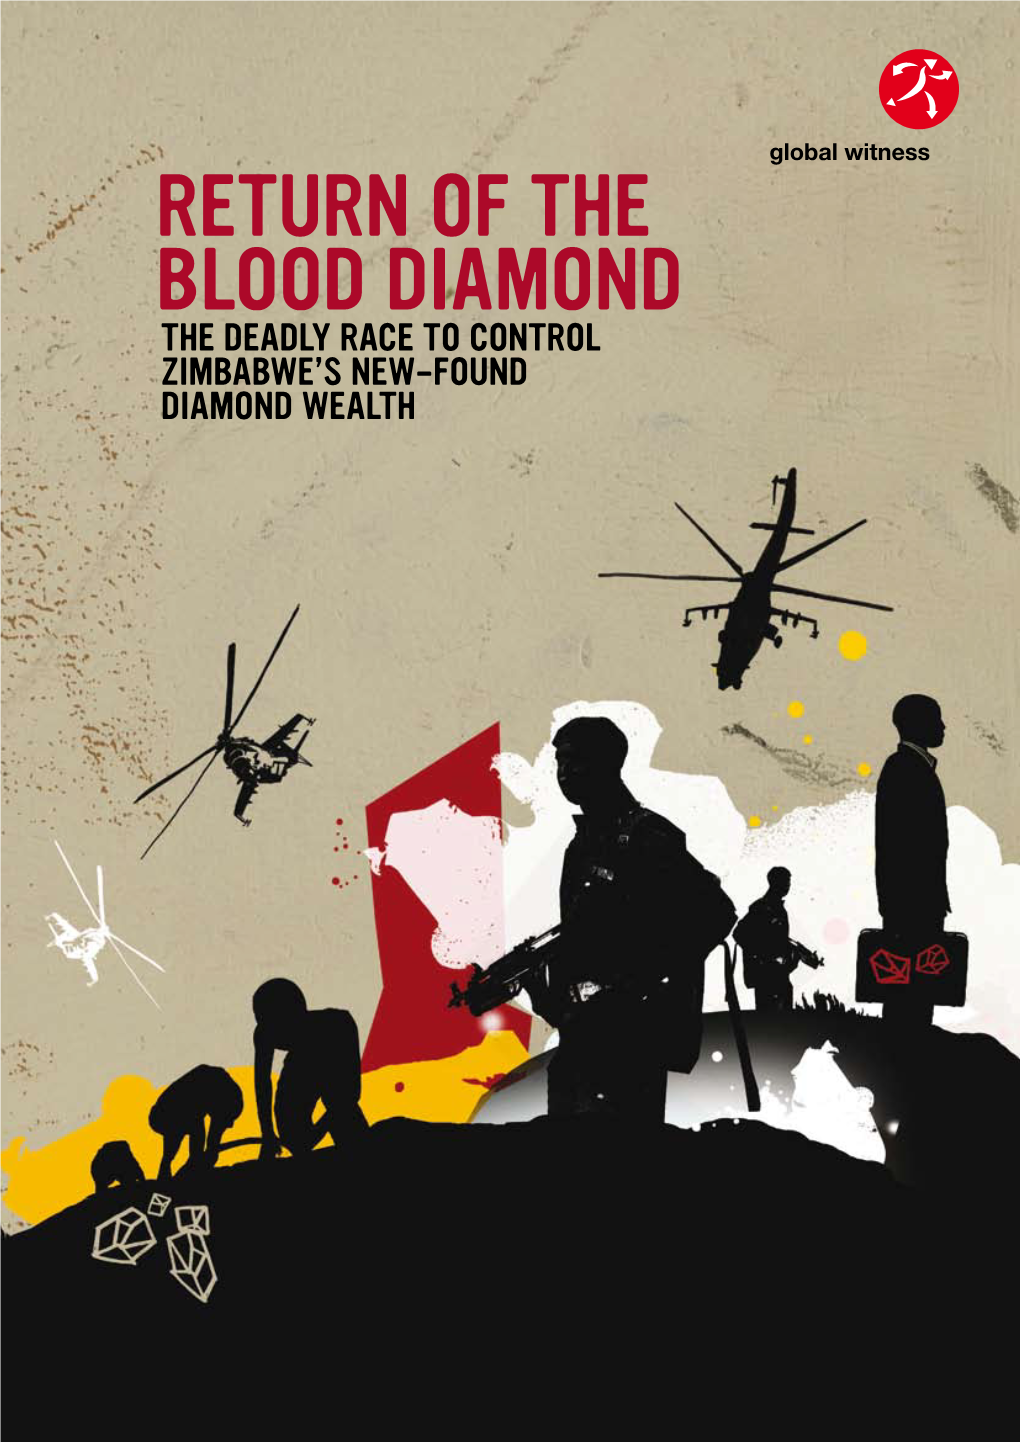 RETURN of the BLOOD DIAMOND Global Witness the DEADLY RACE to CONTROL ZIMBABWE’S NEW-FOUND DIAMOND WEALTH